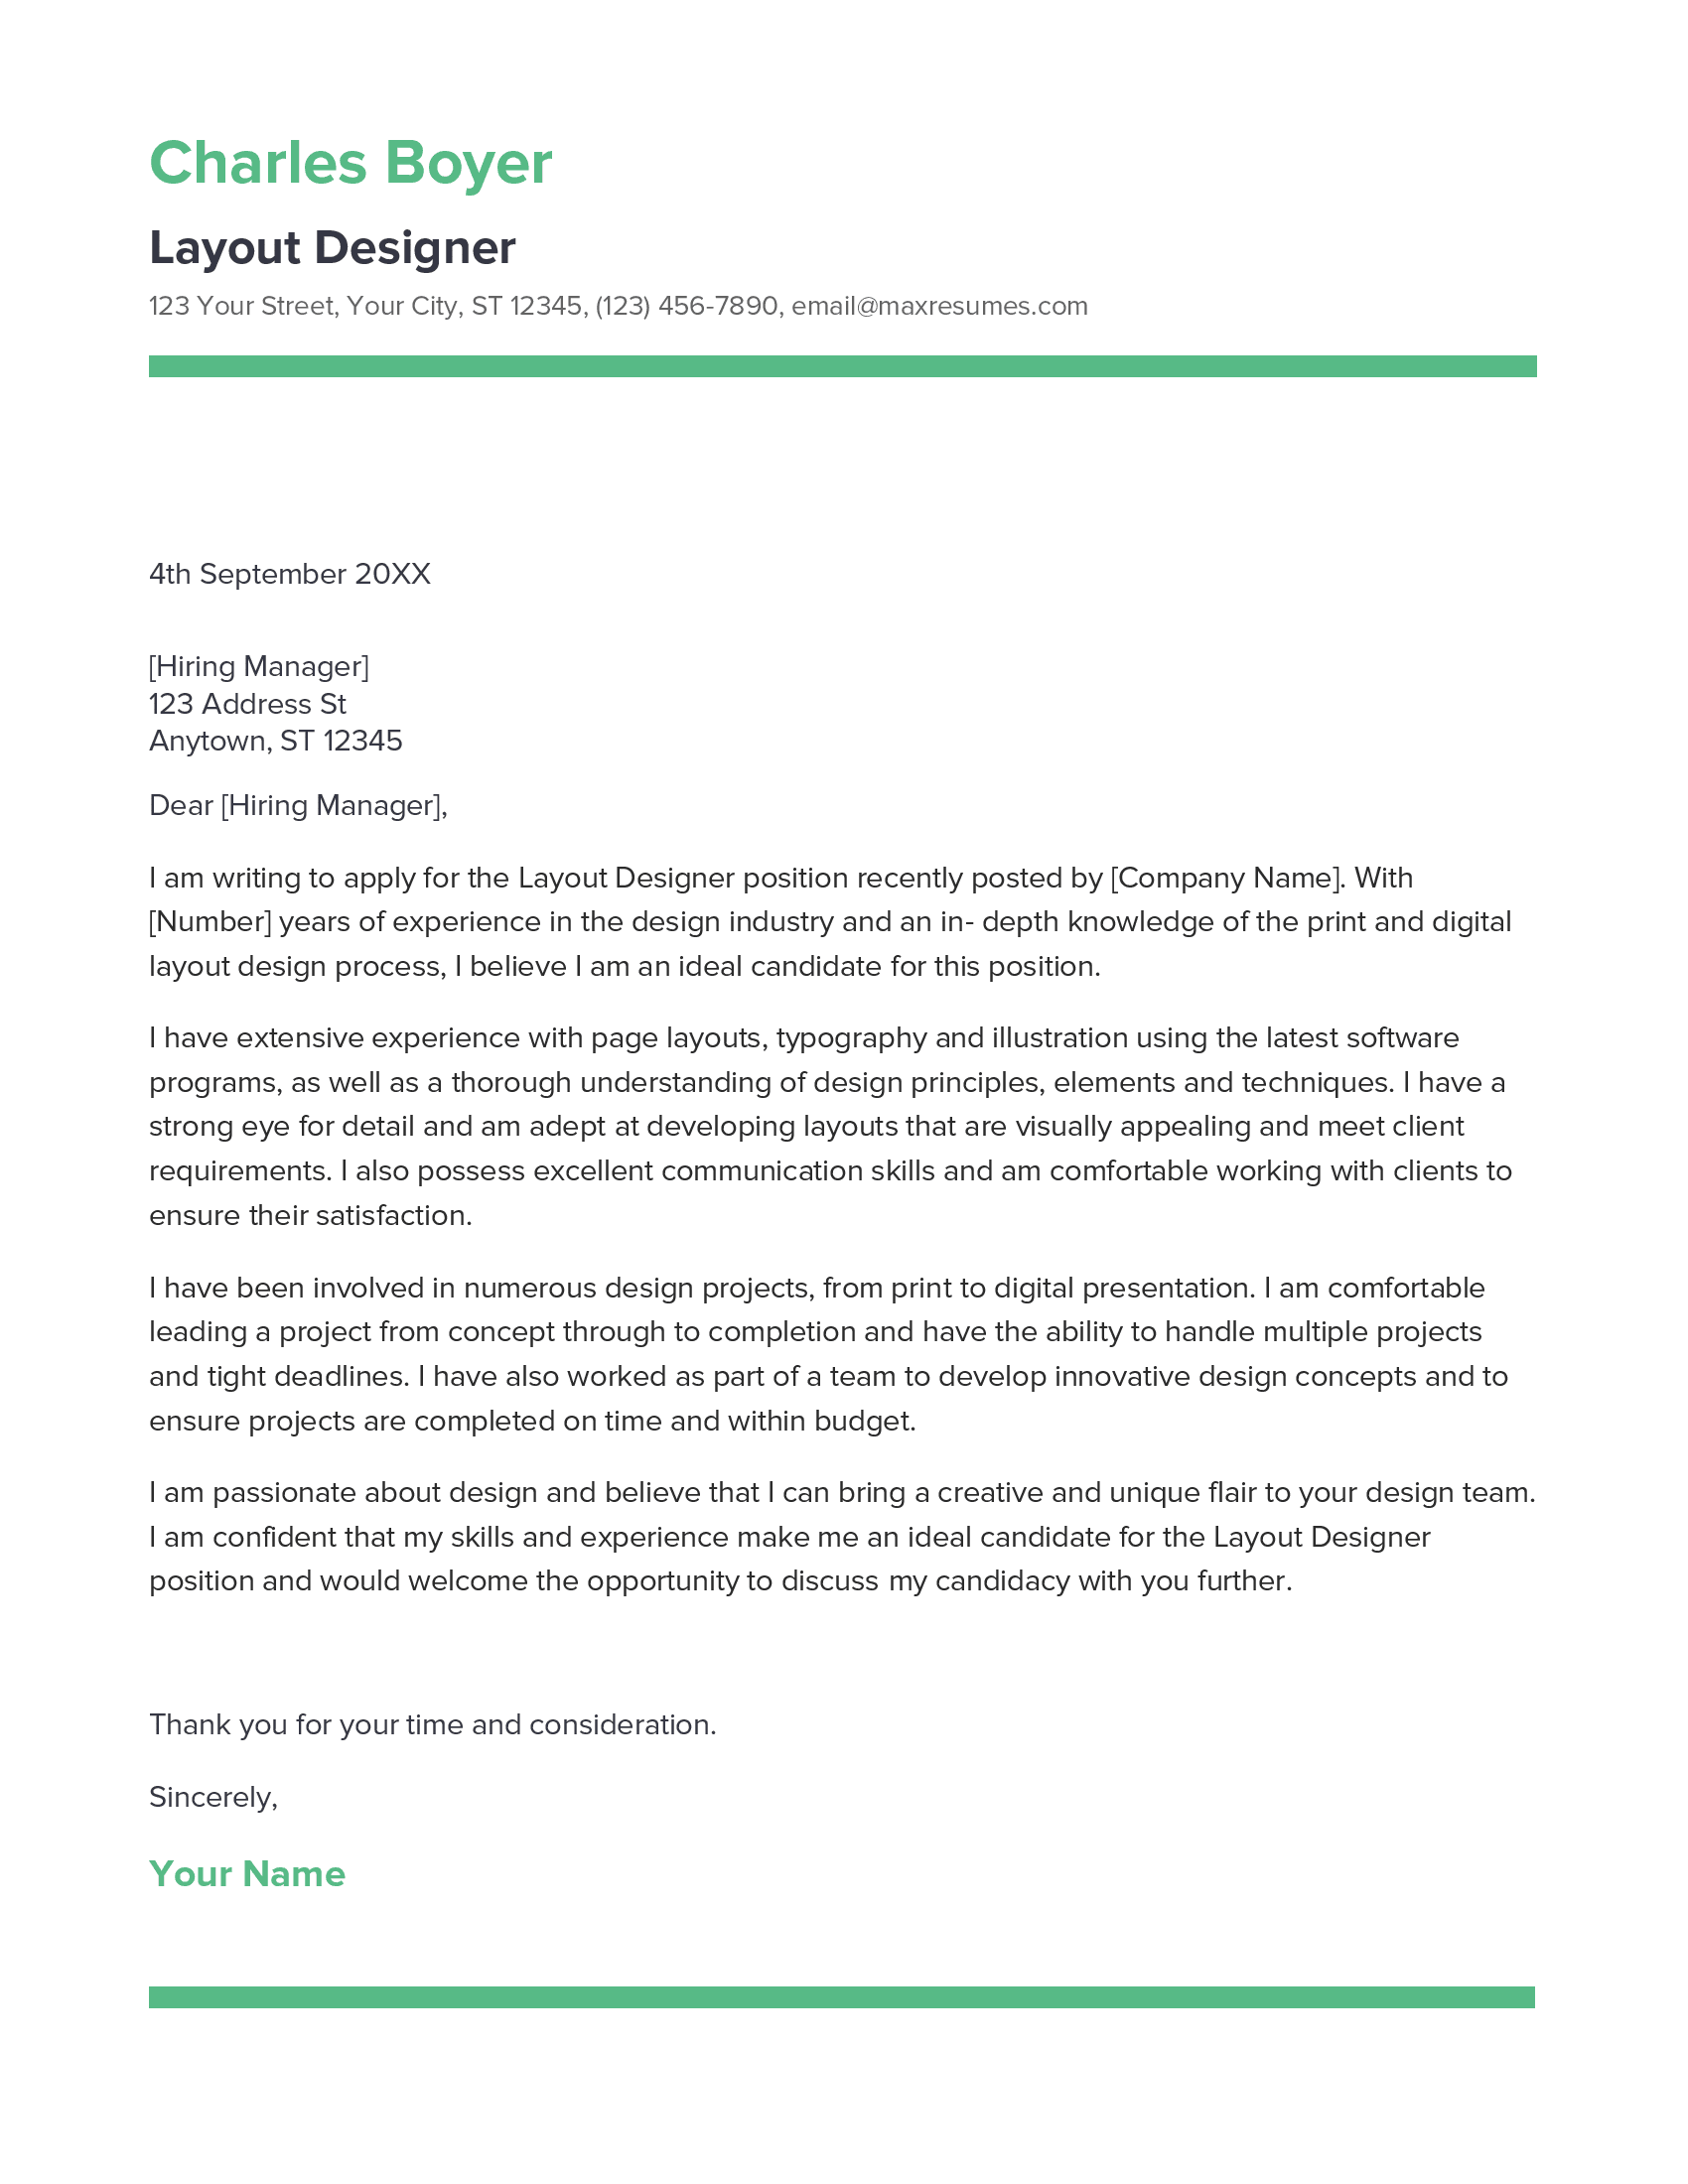 Layout Designer Cover Letter Example